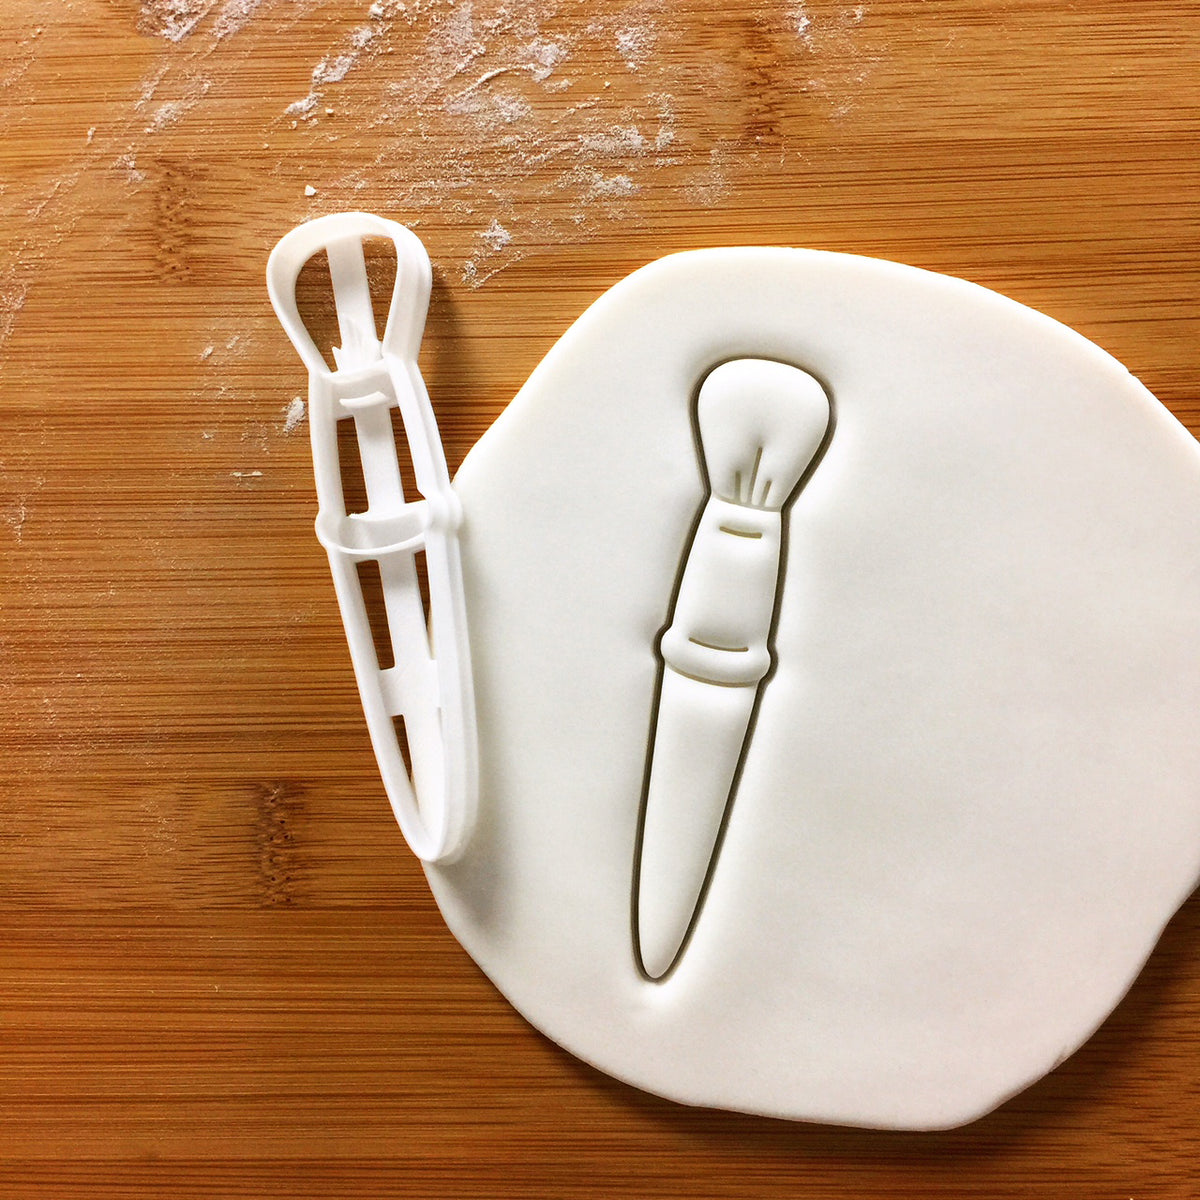 Foundation Brush Cookie Cutter